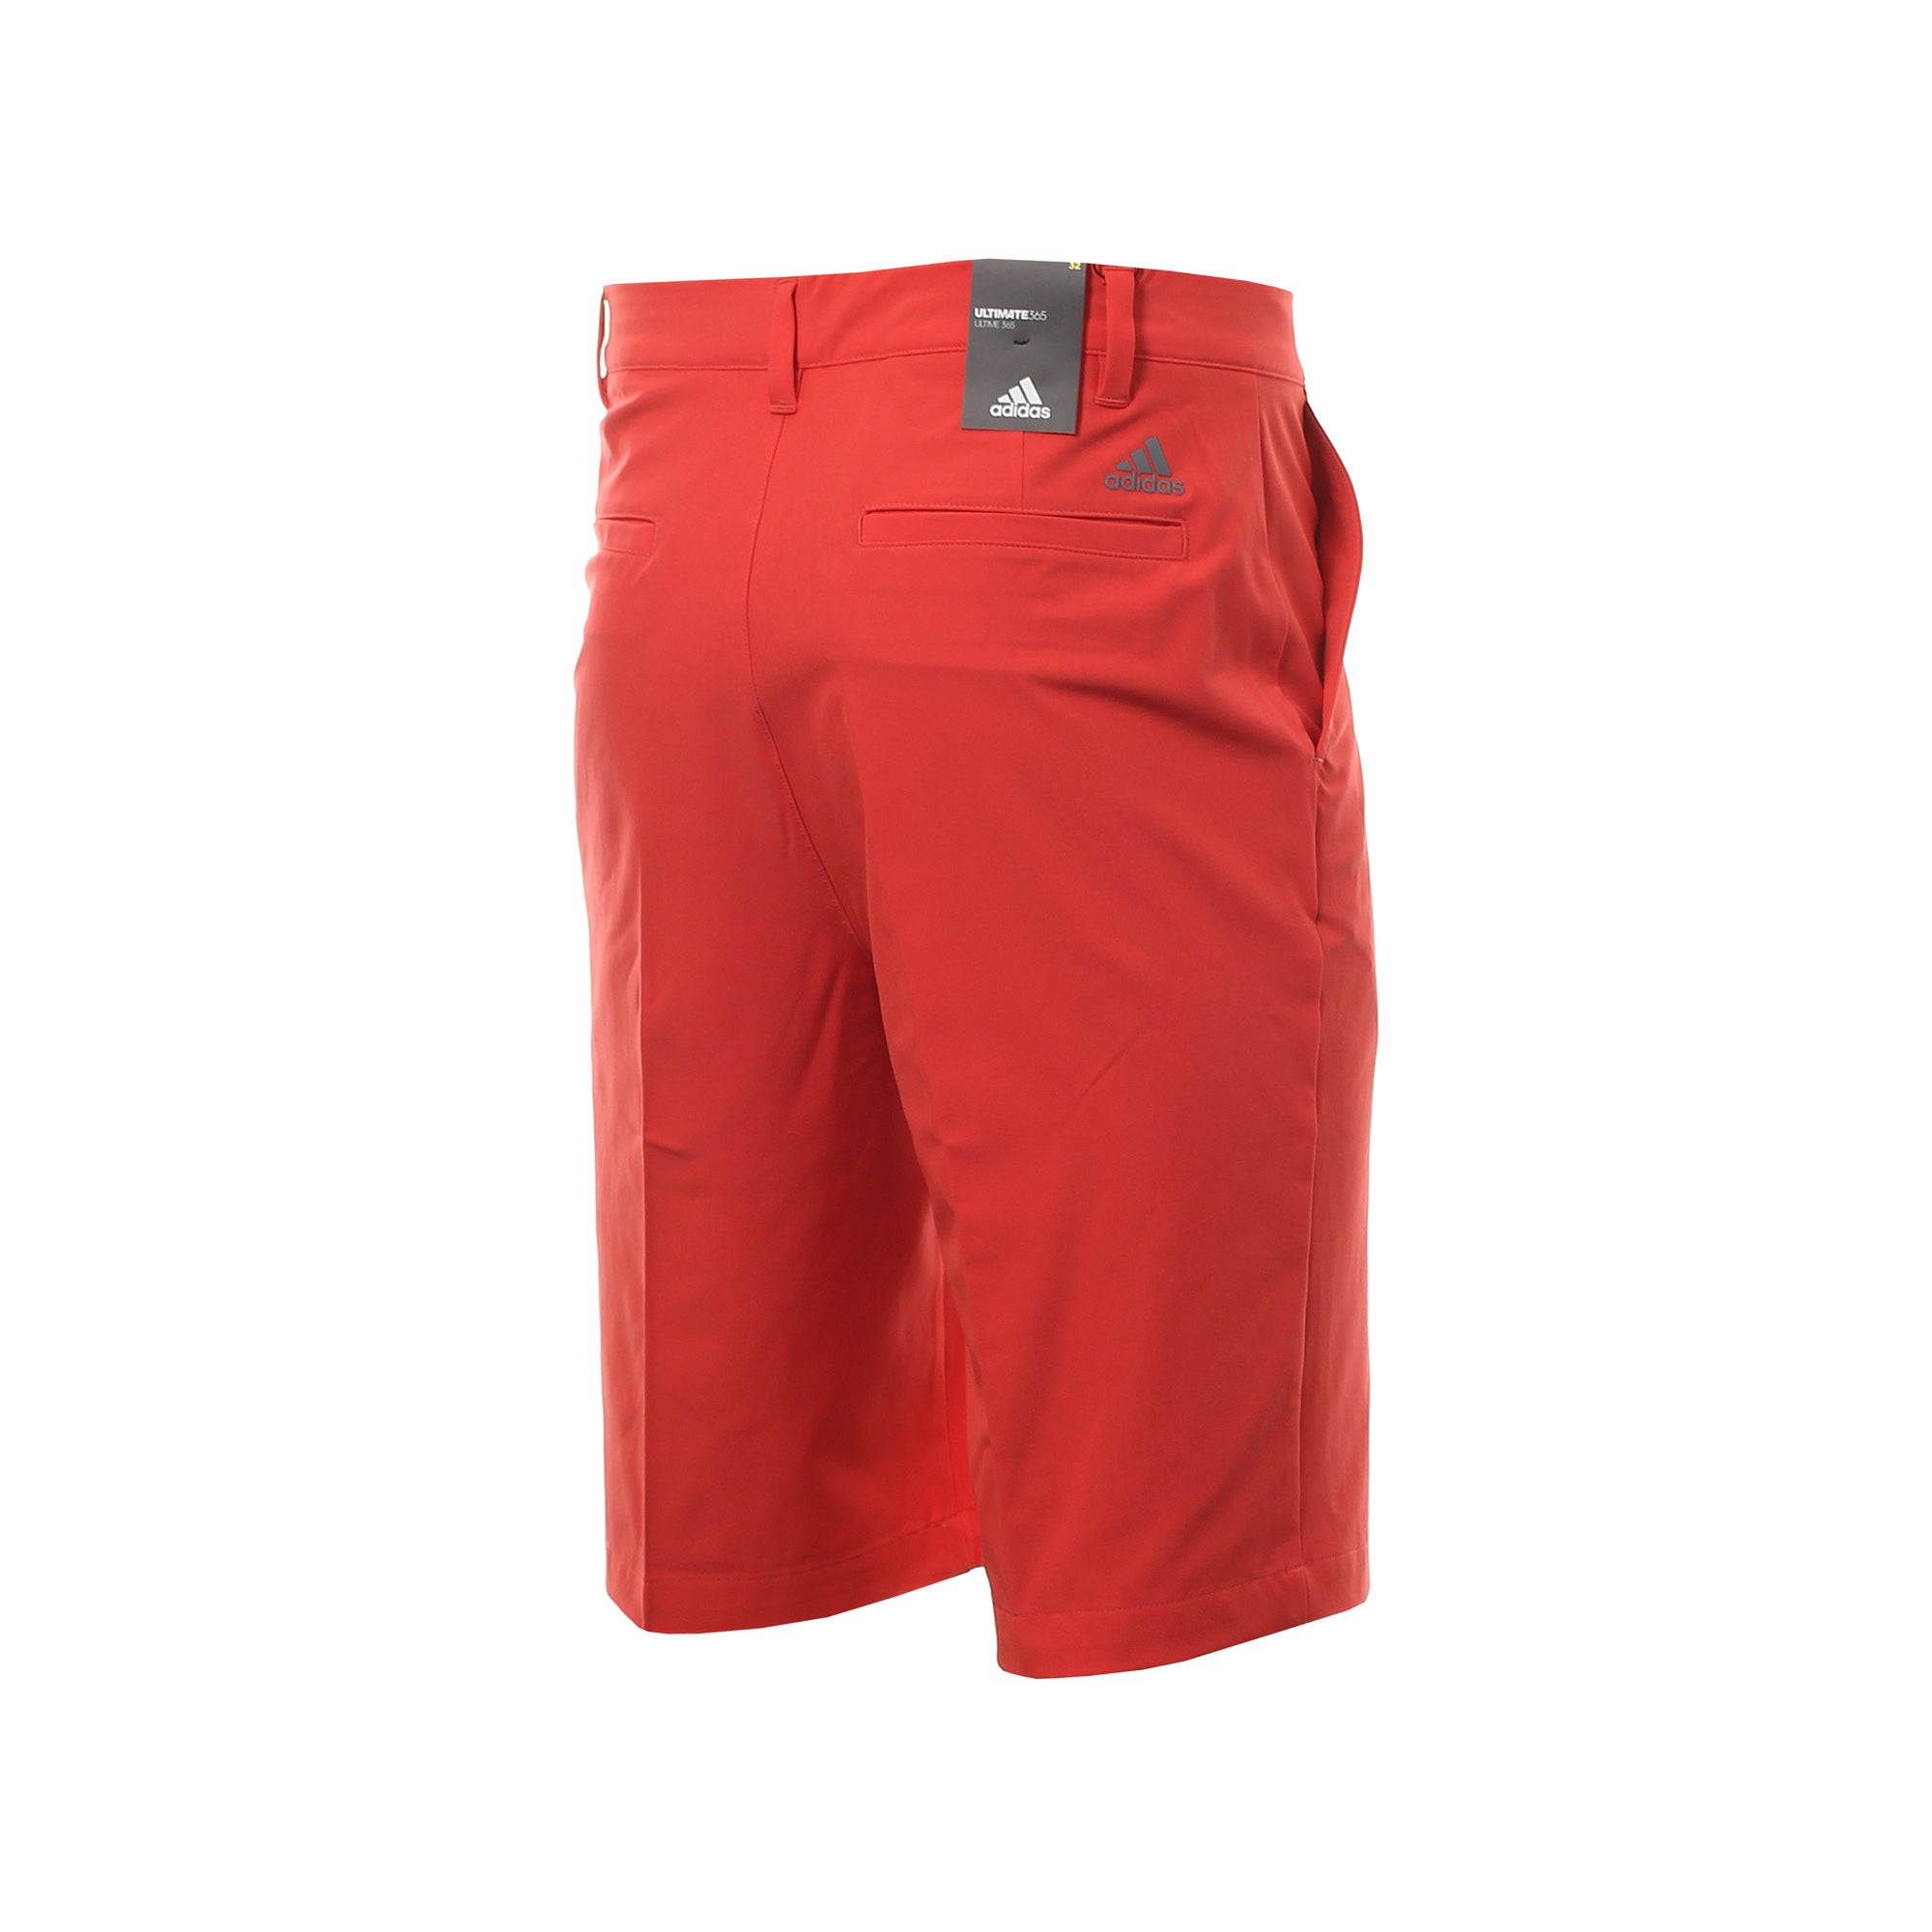 adidas Golf Ultimate365 Short FP7269 Coral | Function18